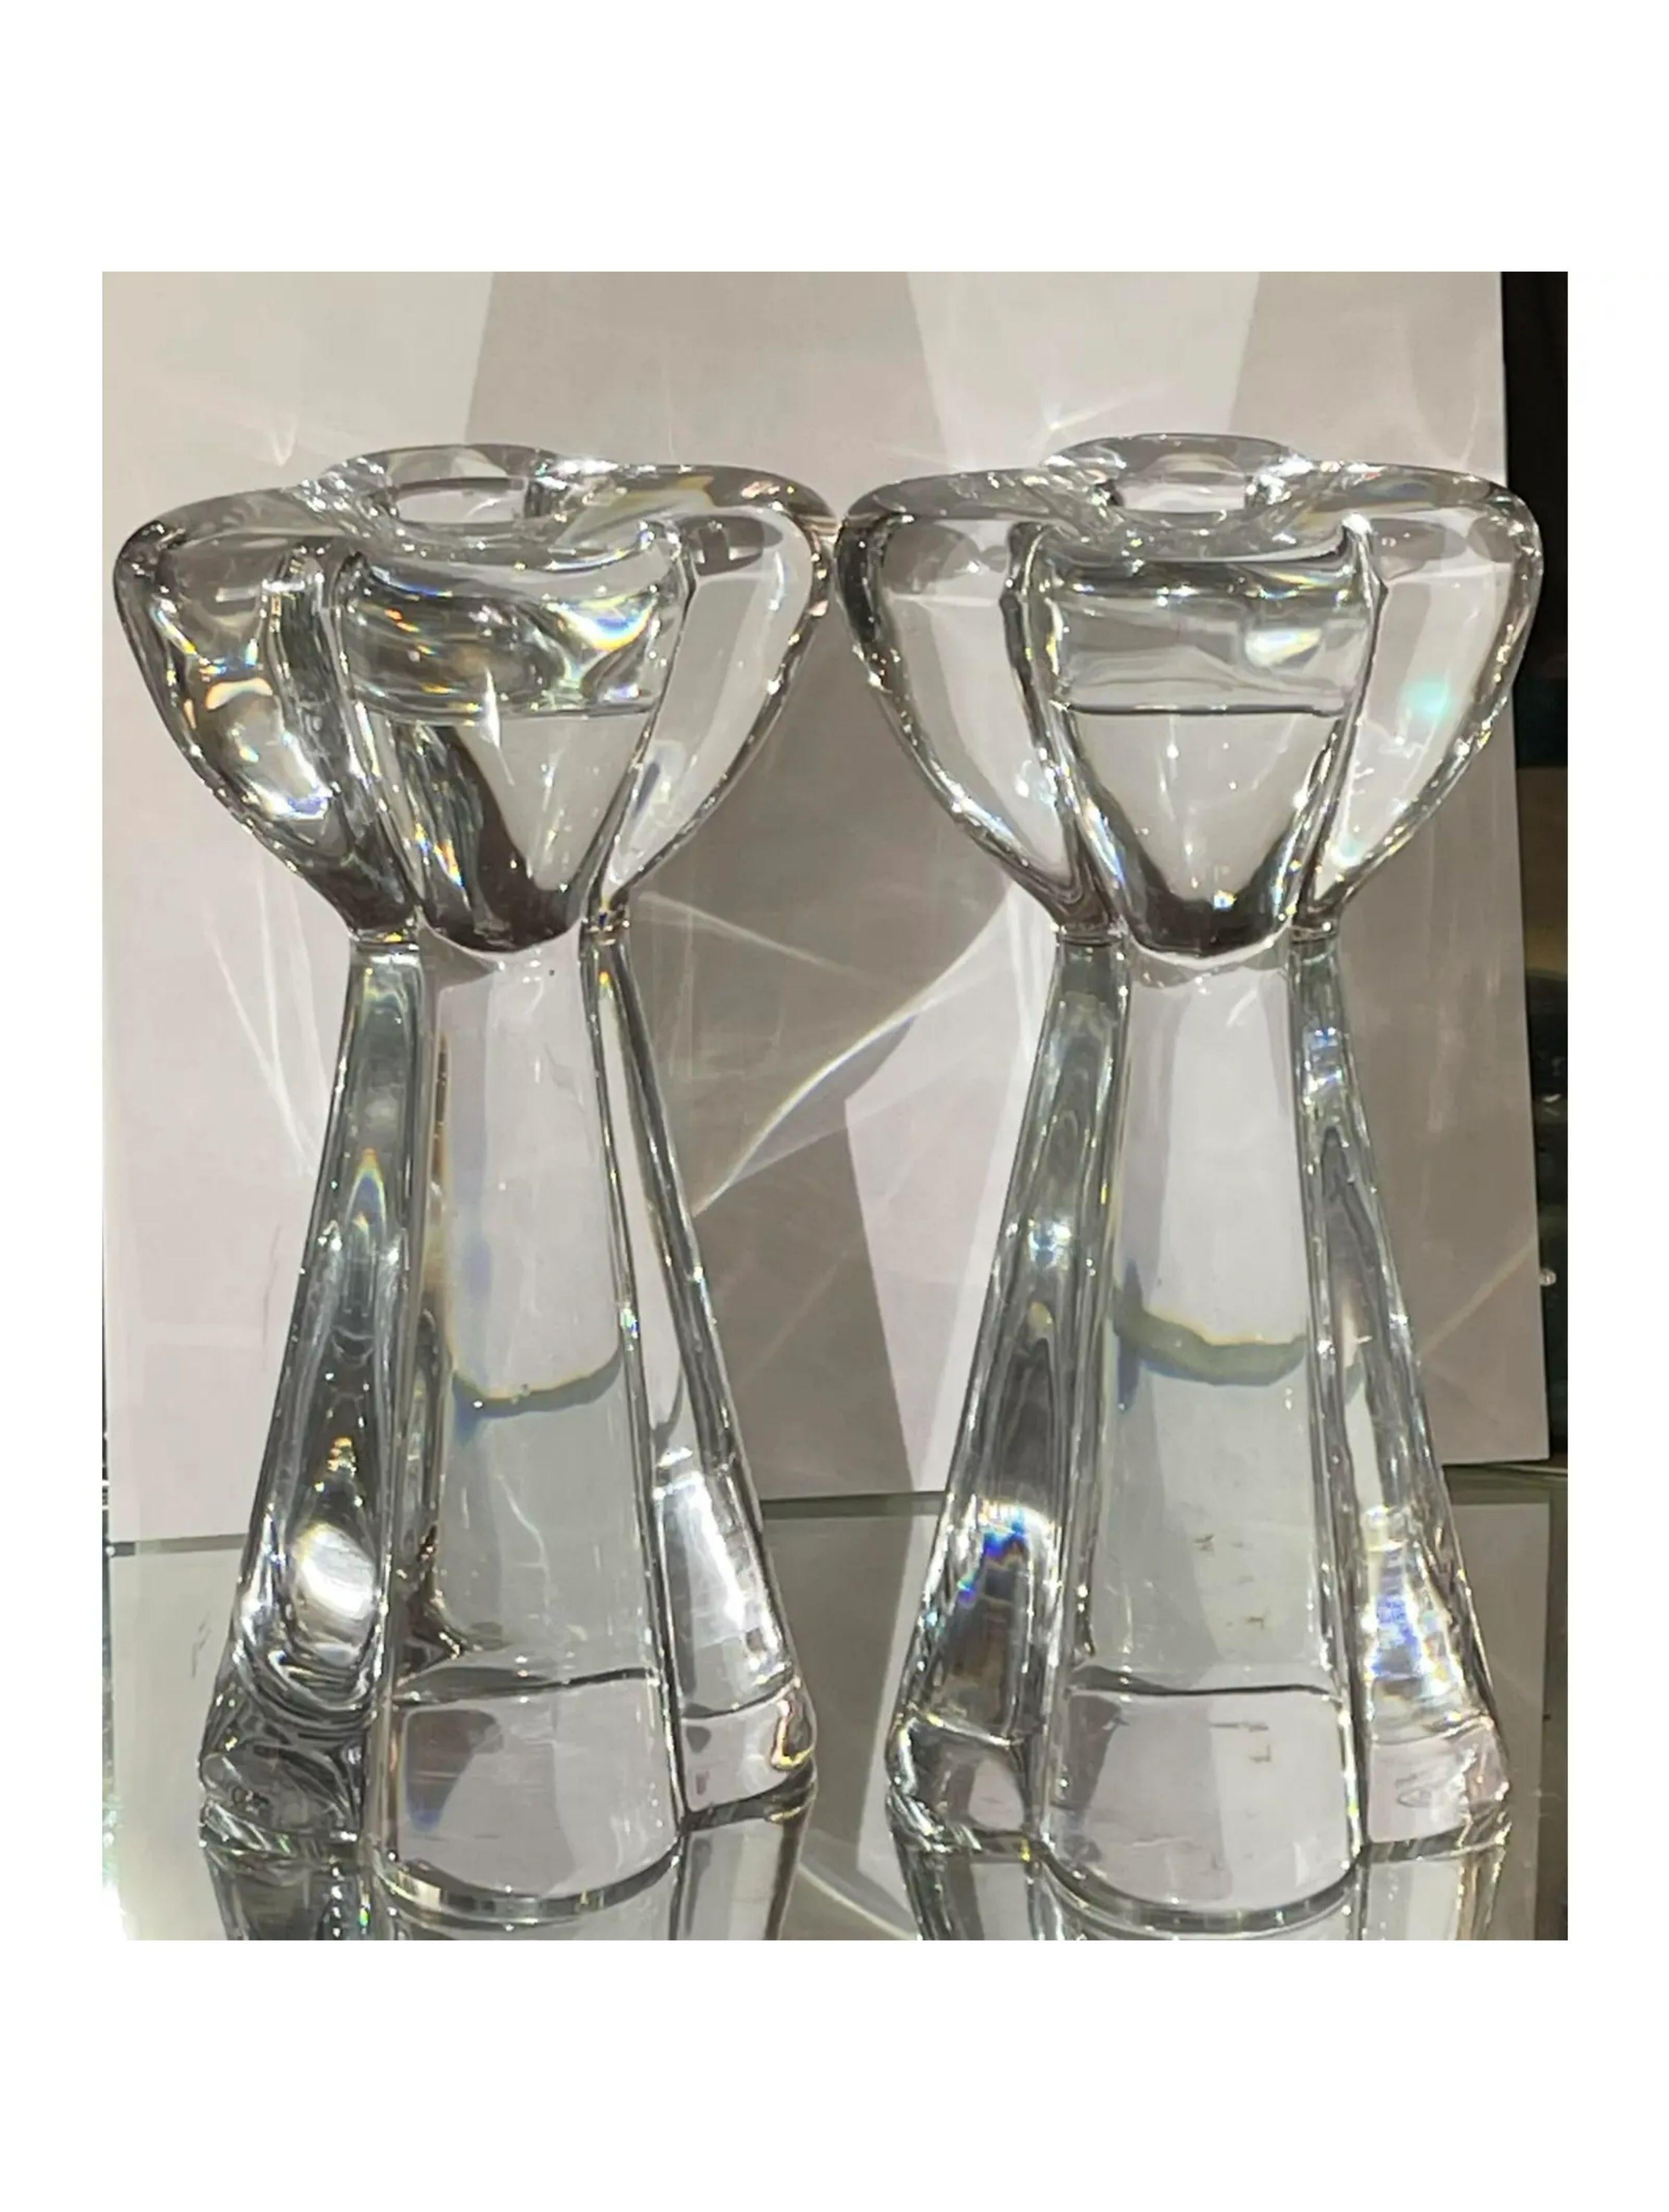 Signed Art Deco Baccarat French Crystal Candlesticks - a Pair

Additional information: 
Materials: Crystal
Color: Transparent
Brand: Baccarat
Designer: Baccarat
Period: Mid 20th Century
Styles: Art Deco, French
Item Type: Vintage, Antique